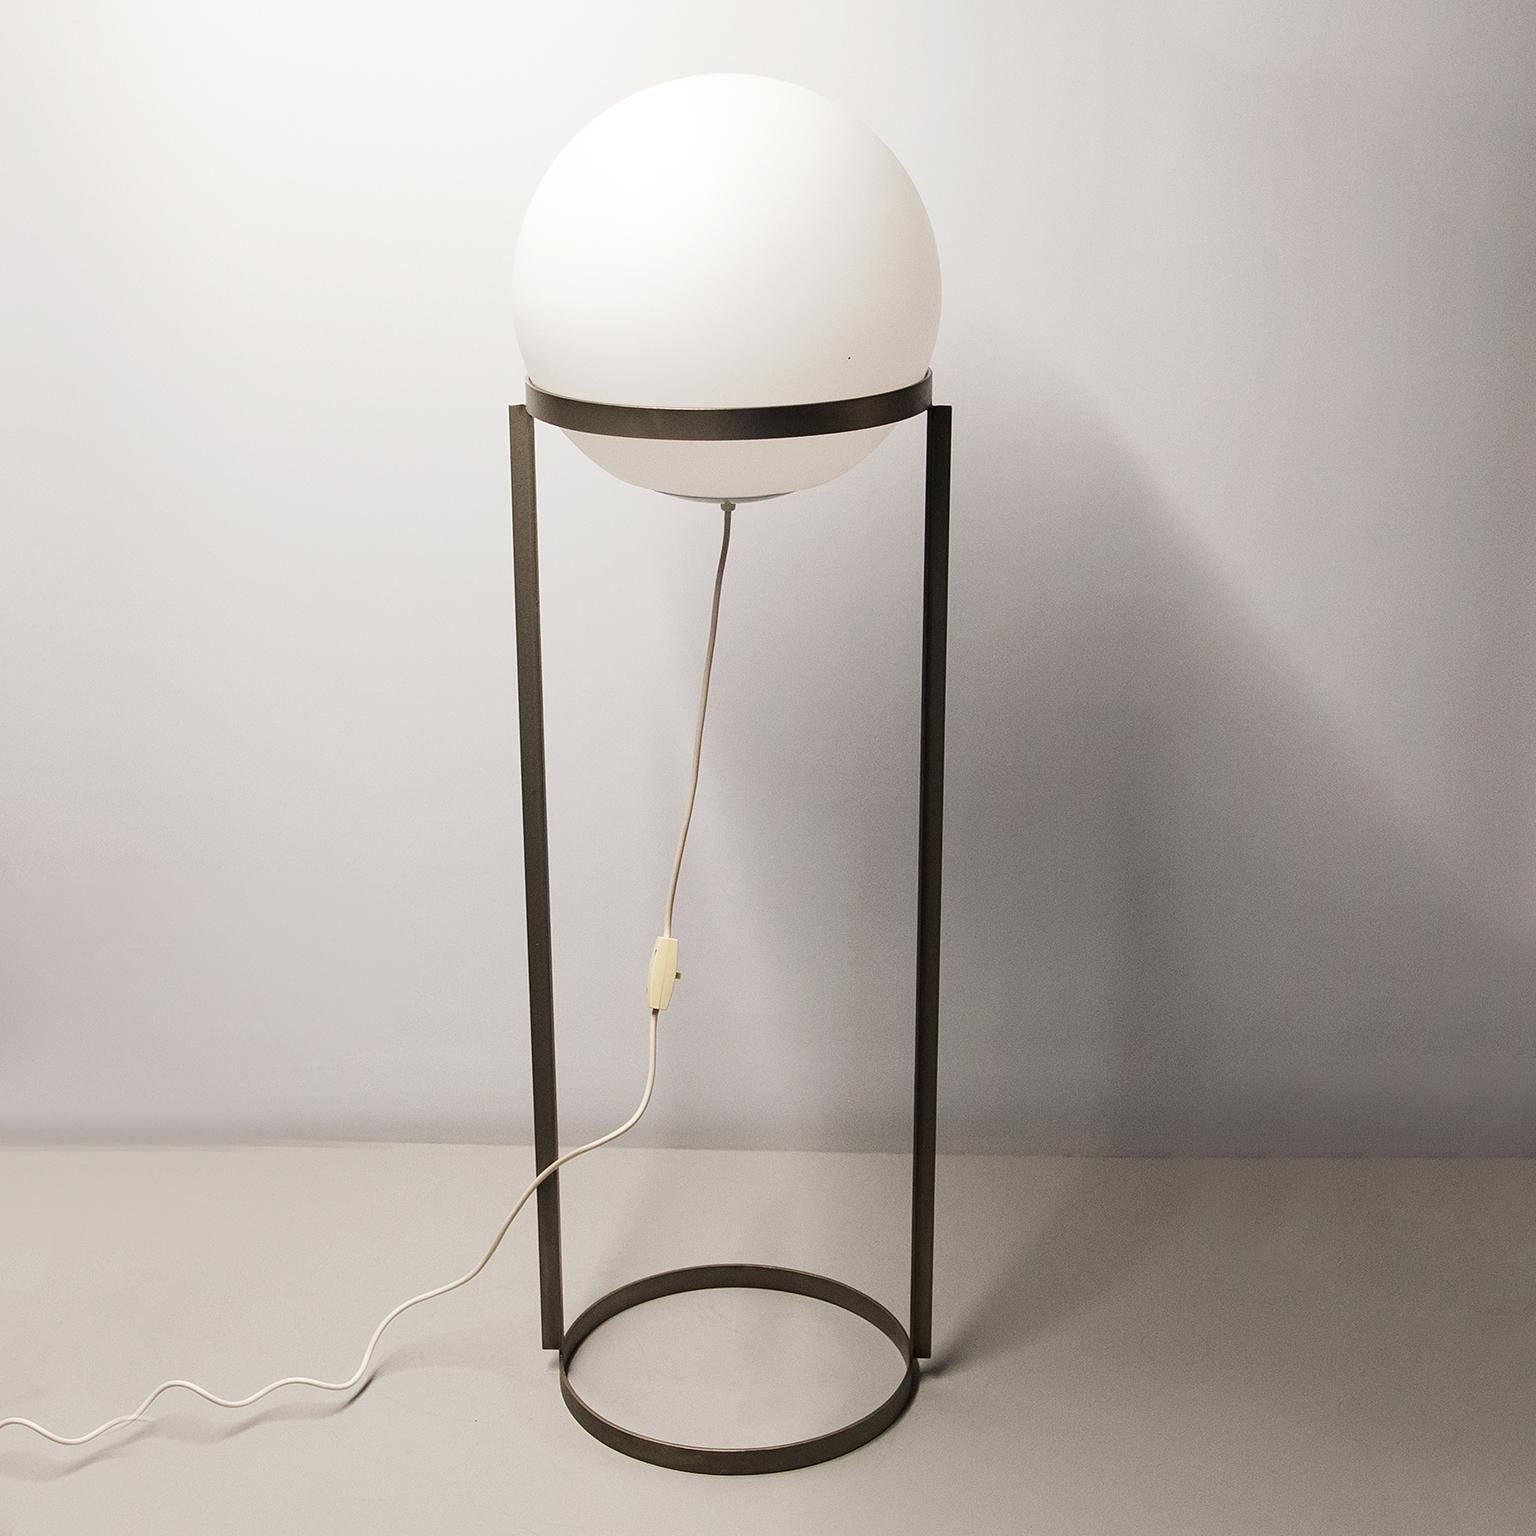 Carl Auebock designed and manufactured this rare floor lamp in 1969.
The model name is 4095 and it is called Kugelleuchte, like Ball lamp.
Made in a nickel plated metal frame and a frosted glass shade that gives a very nice spherical light. Compared